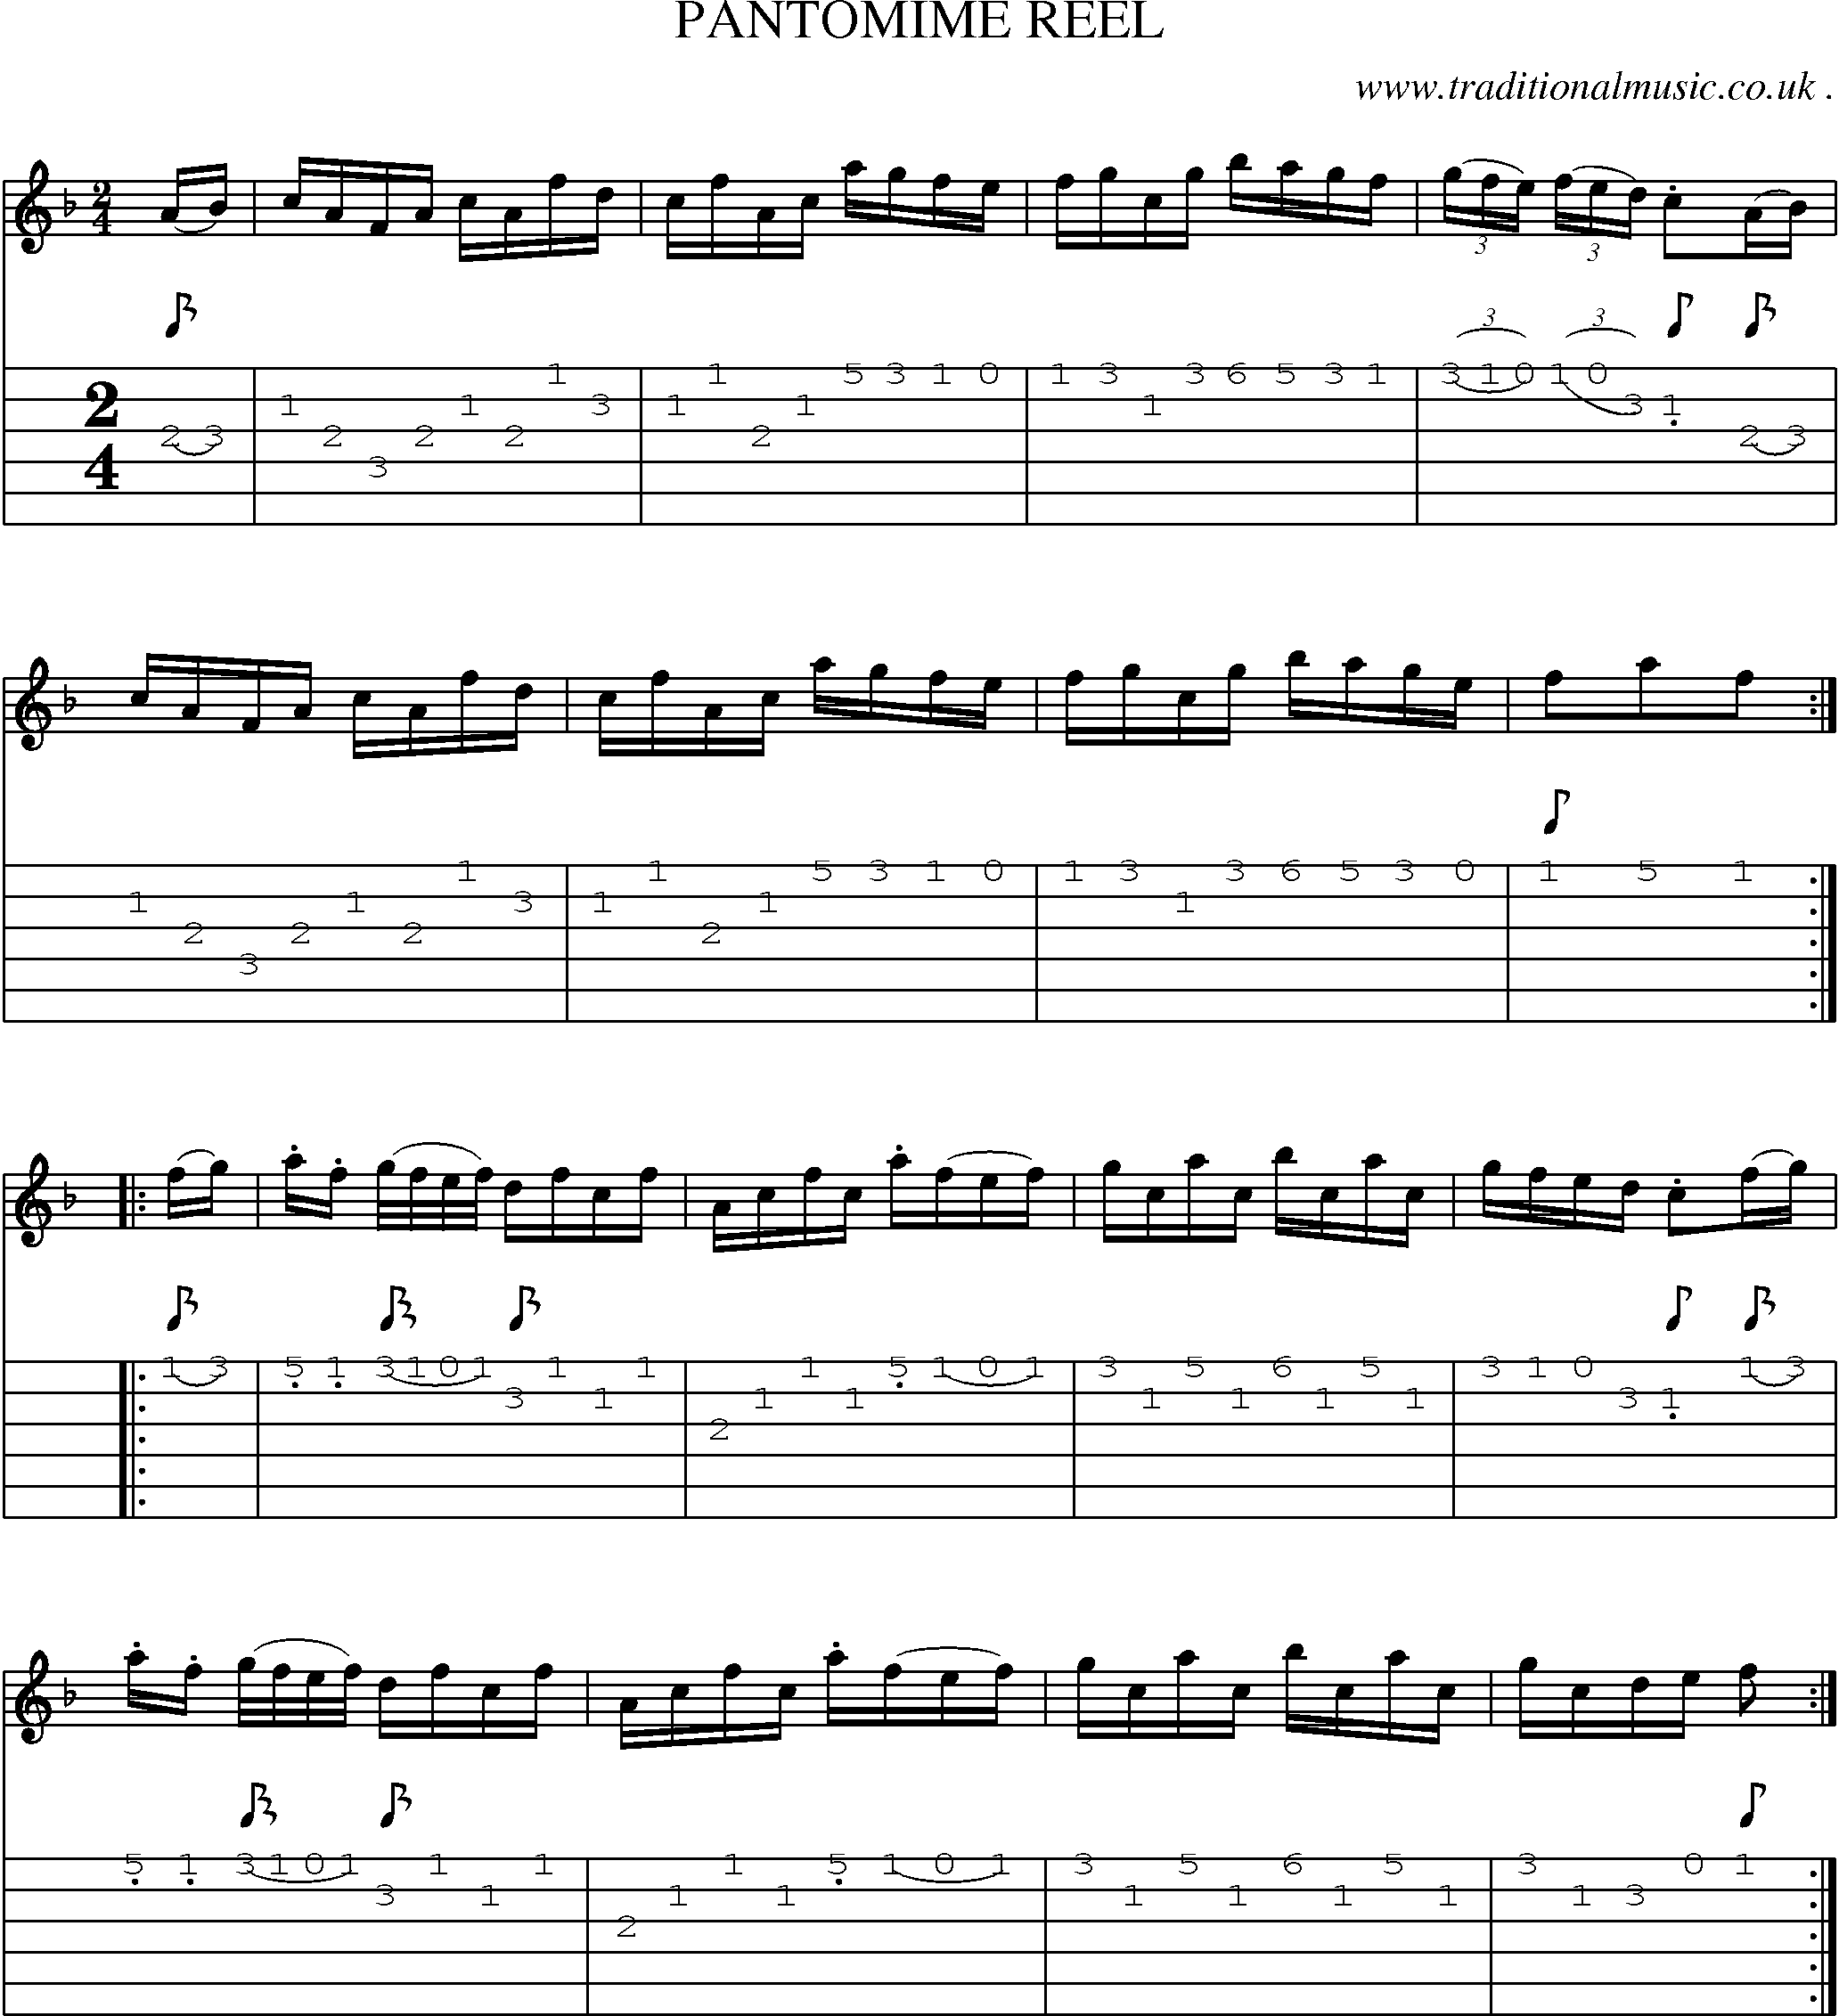 Sheet-Music and Guitar Tabs for Pantomime Reel